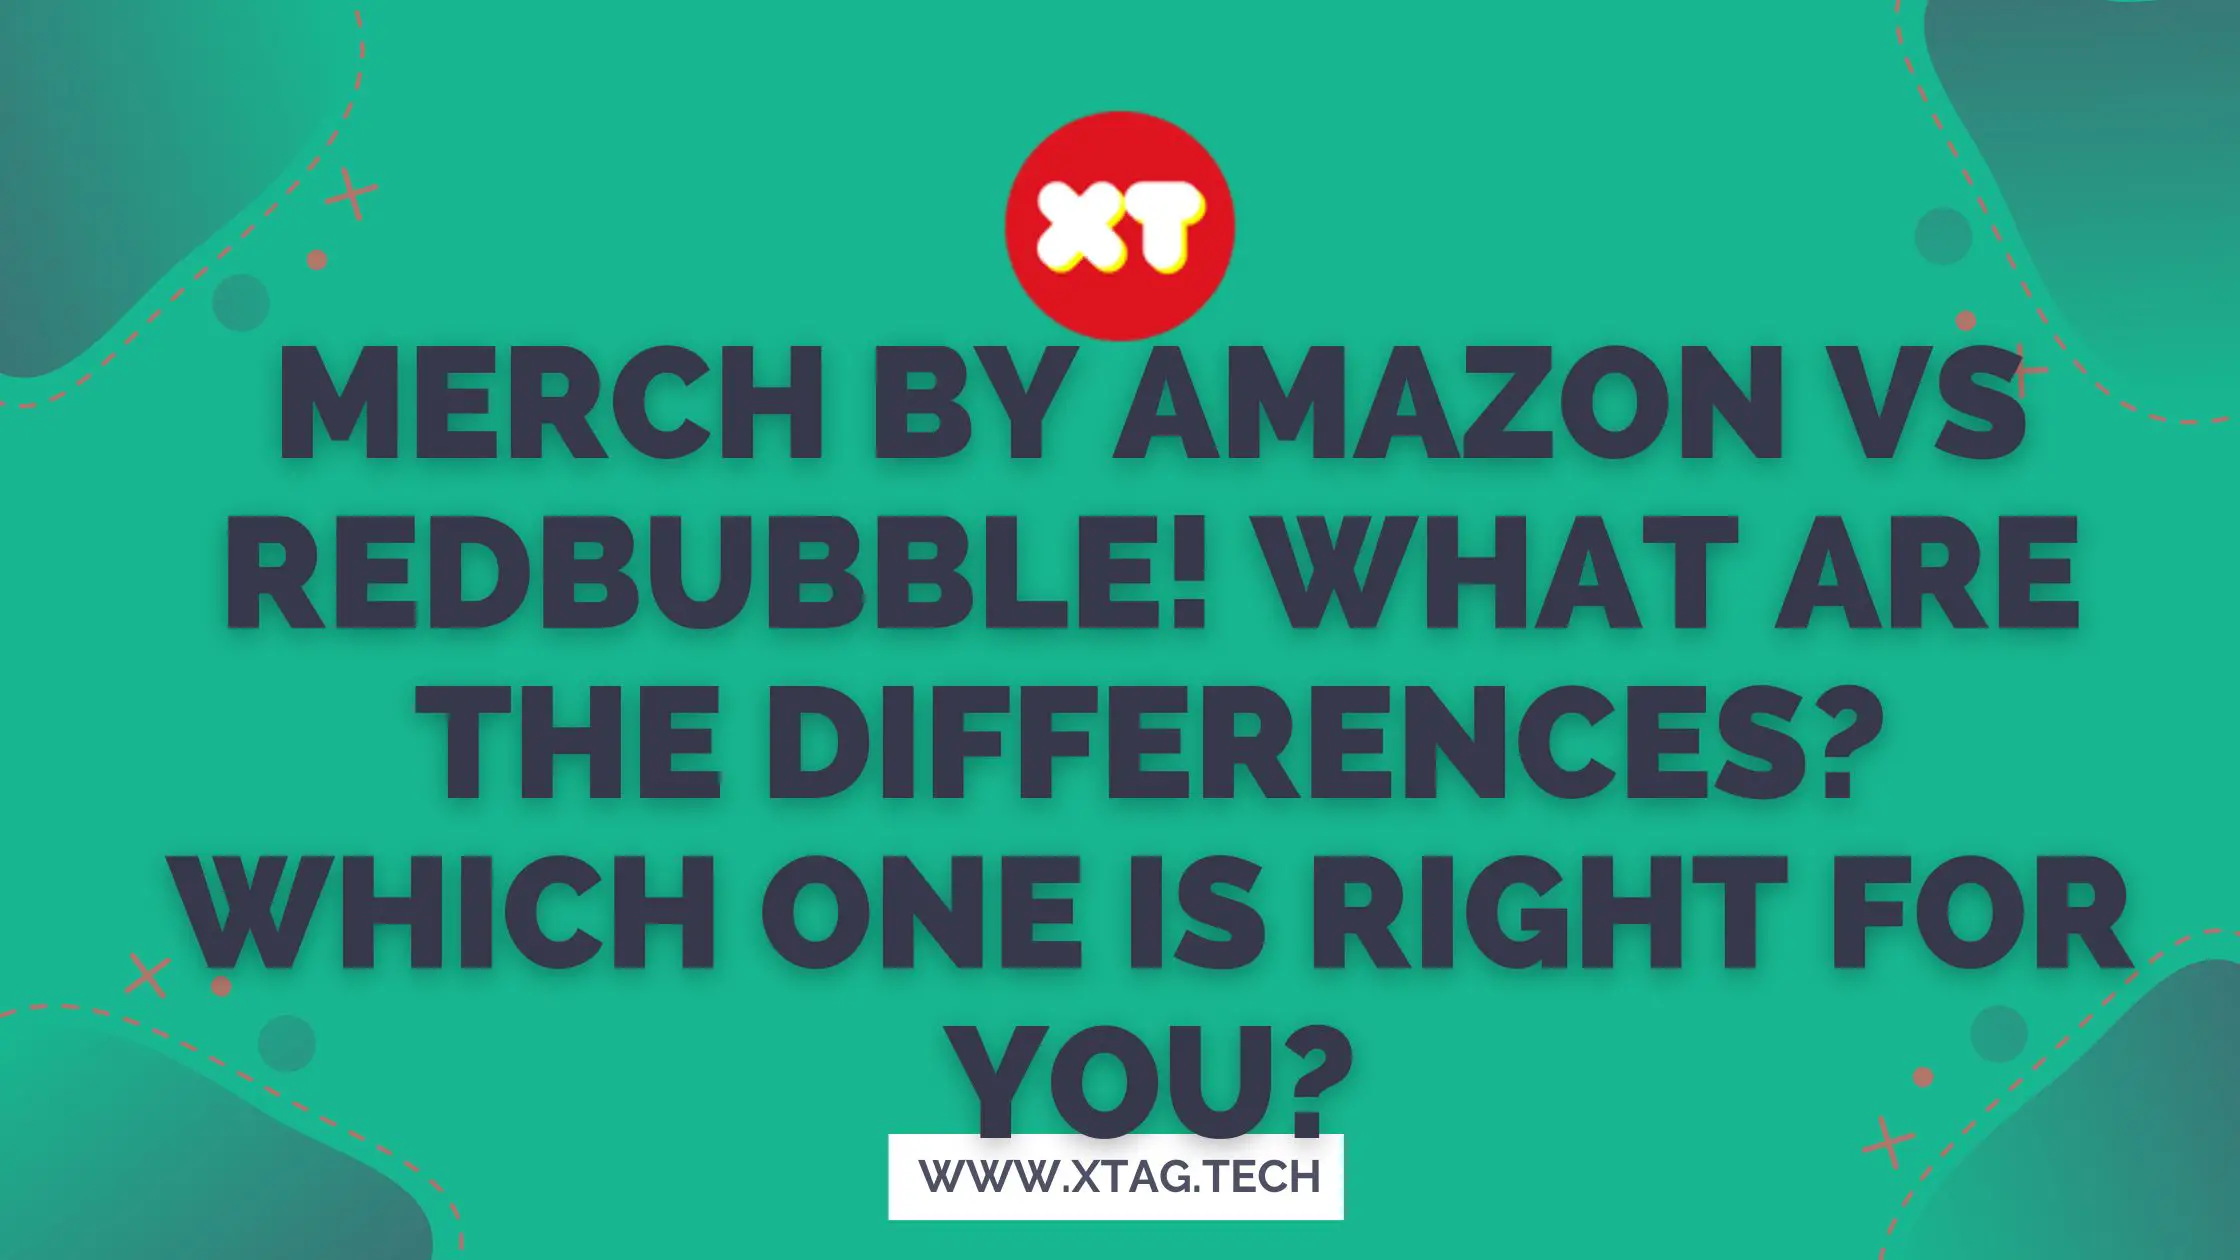 Merch By Amazon Vs Redbubble! What Are The Differences? Which One Is Right For You?